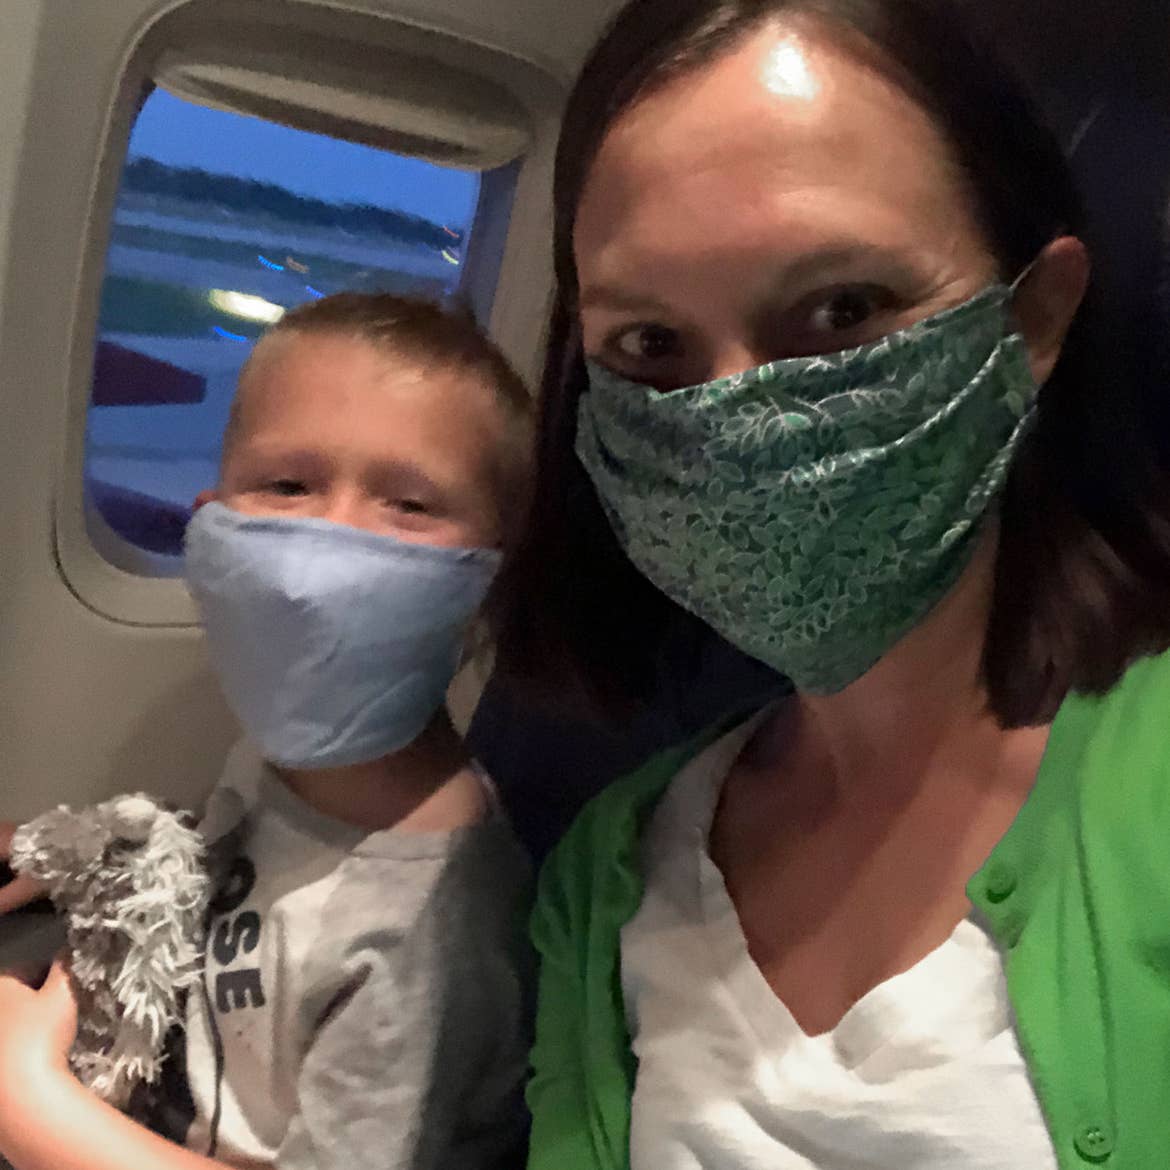 Author, Sarah, and son, Logan, sit near the window seat on their airplane wearing masks for safety.